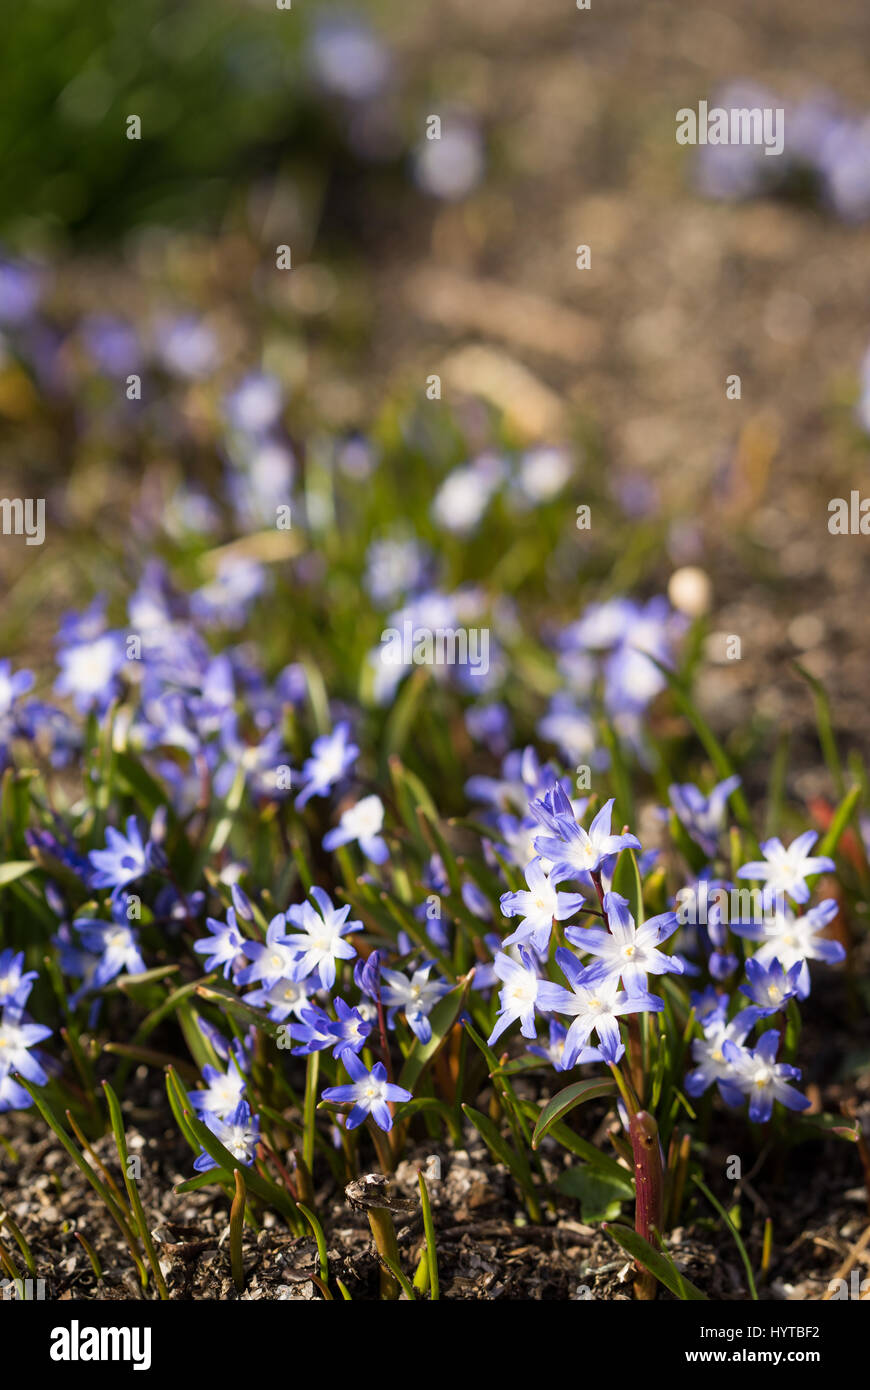 Glory of the snow. Chionodoxa. One of the very earliest signs of spring is when the glory of the snow emerges with its magnificent blue star-shaped pe Stock Photo